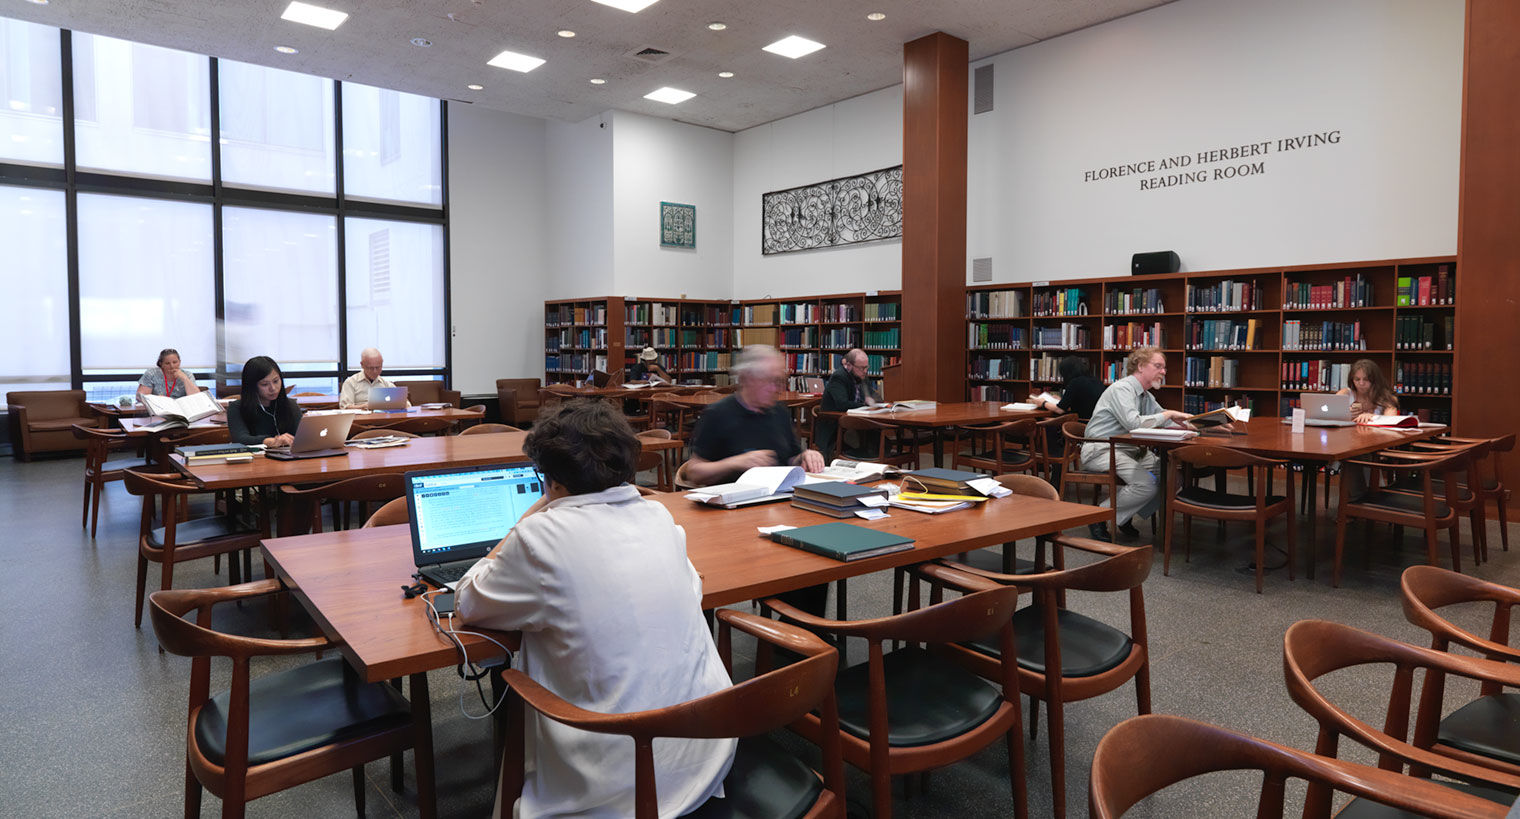 Interior view of the Florence and Irving Herbert Reading Room, showing library patrons seated at tables reading and using computers